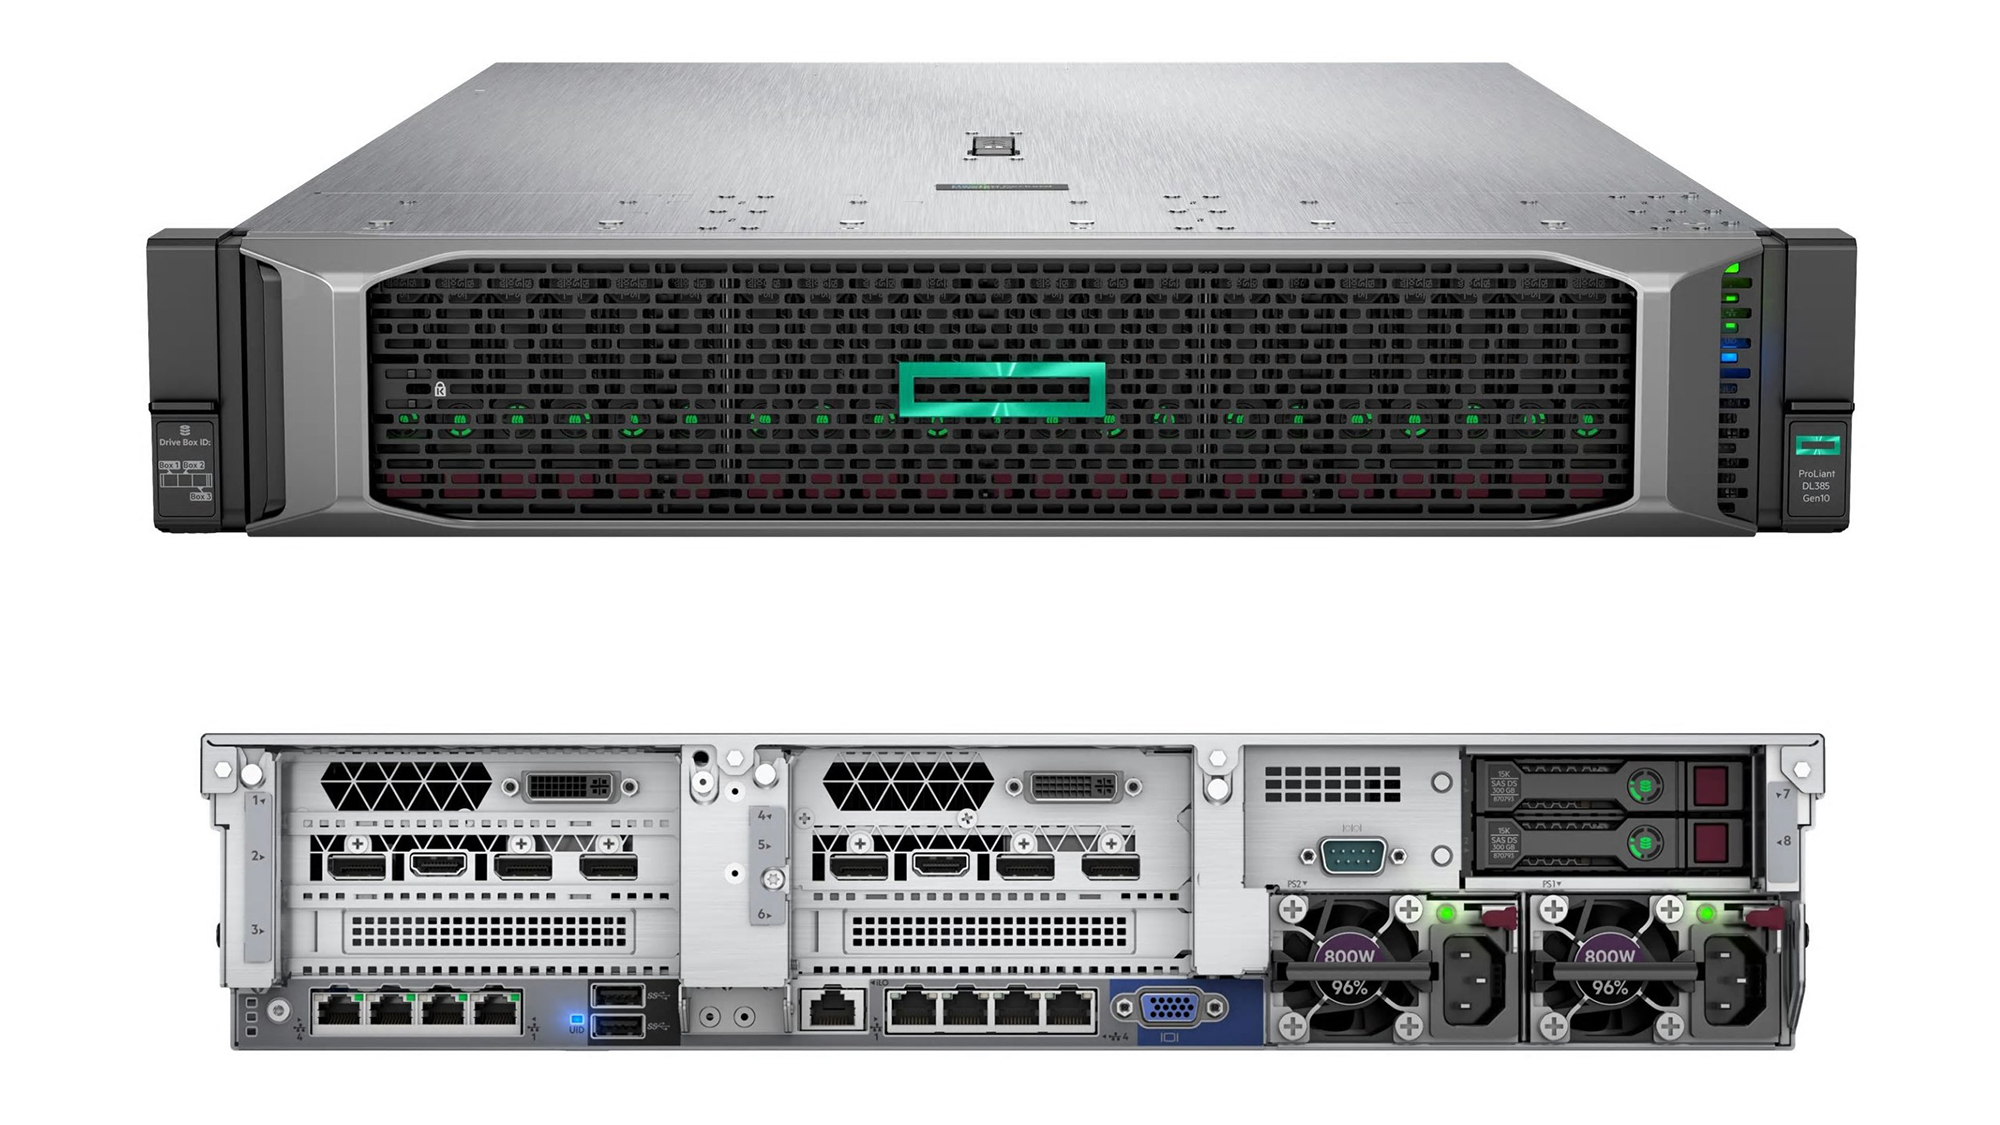 hpe_proliant_dl385_gen10_front_and_back